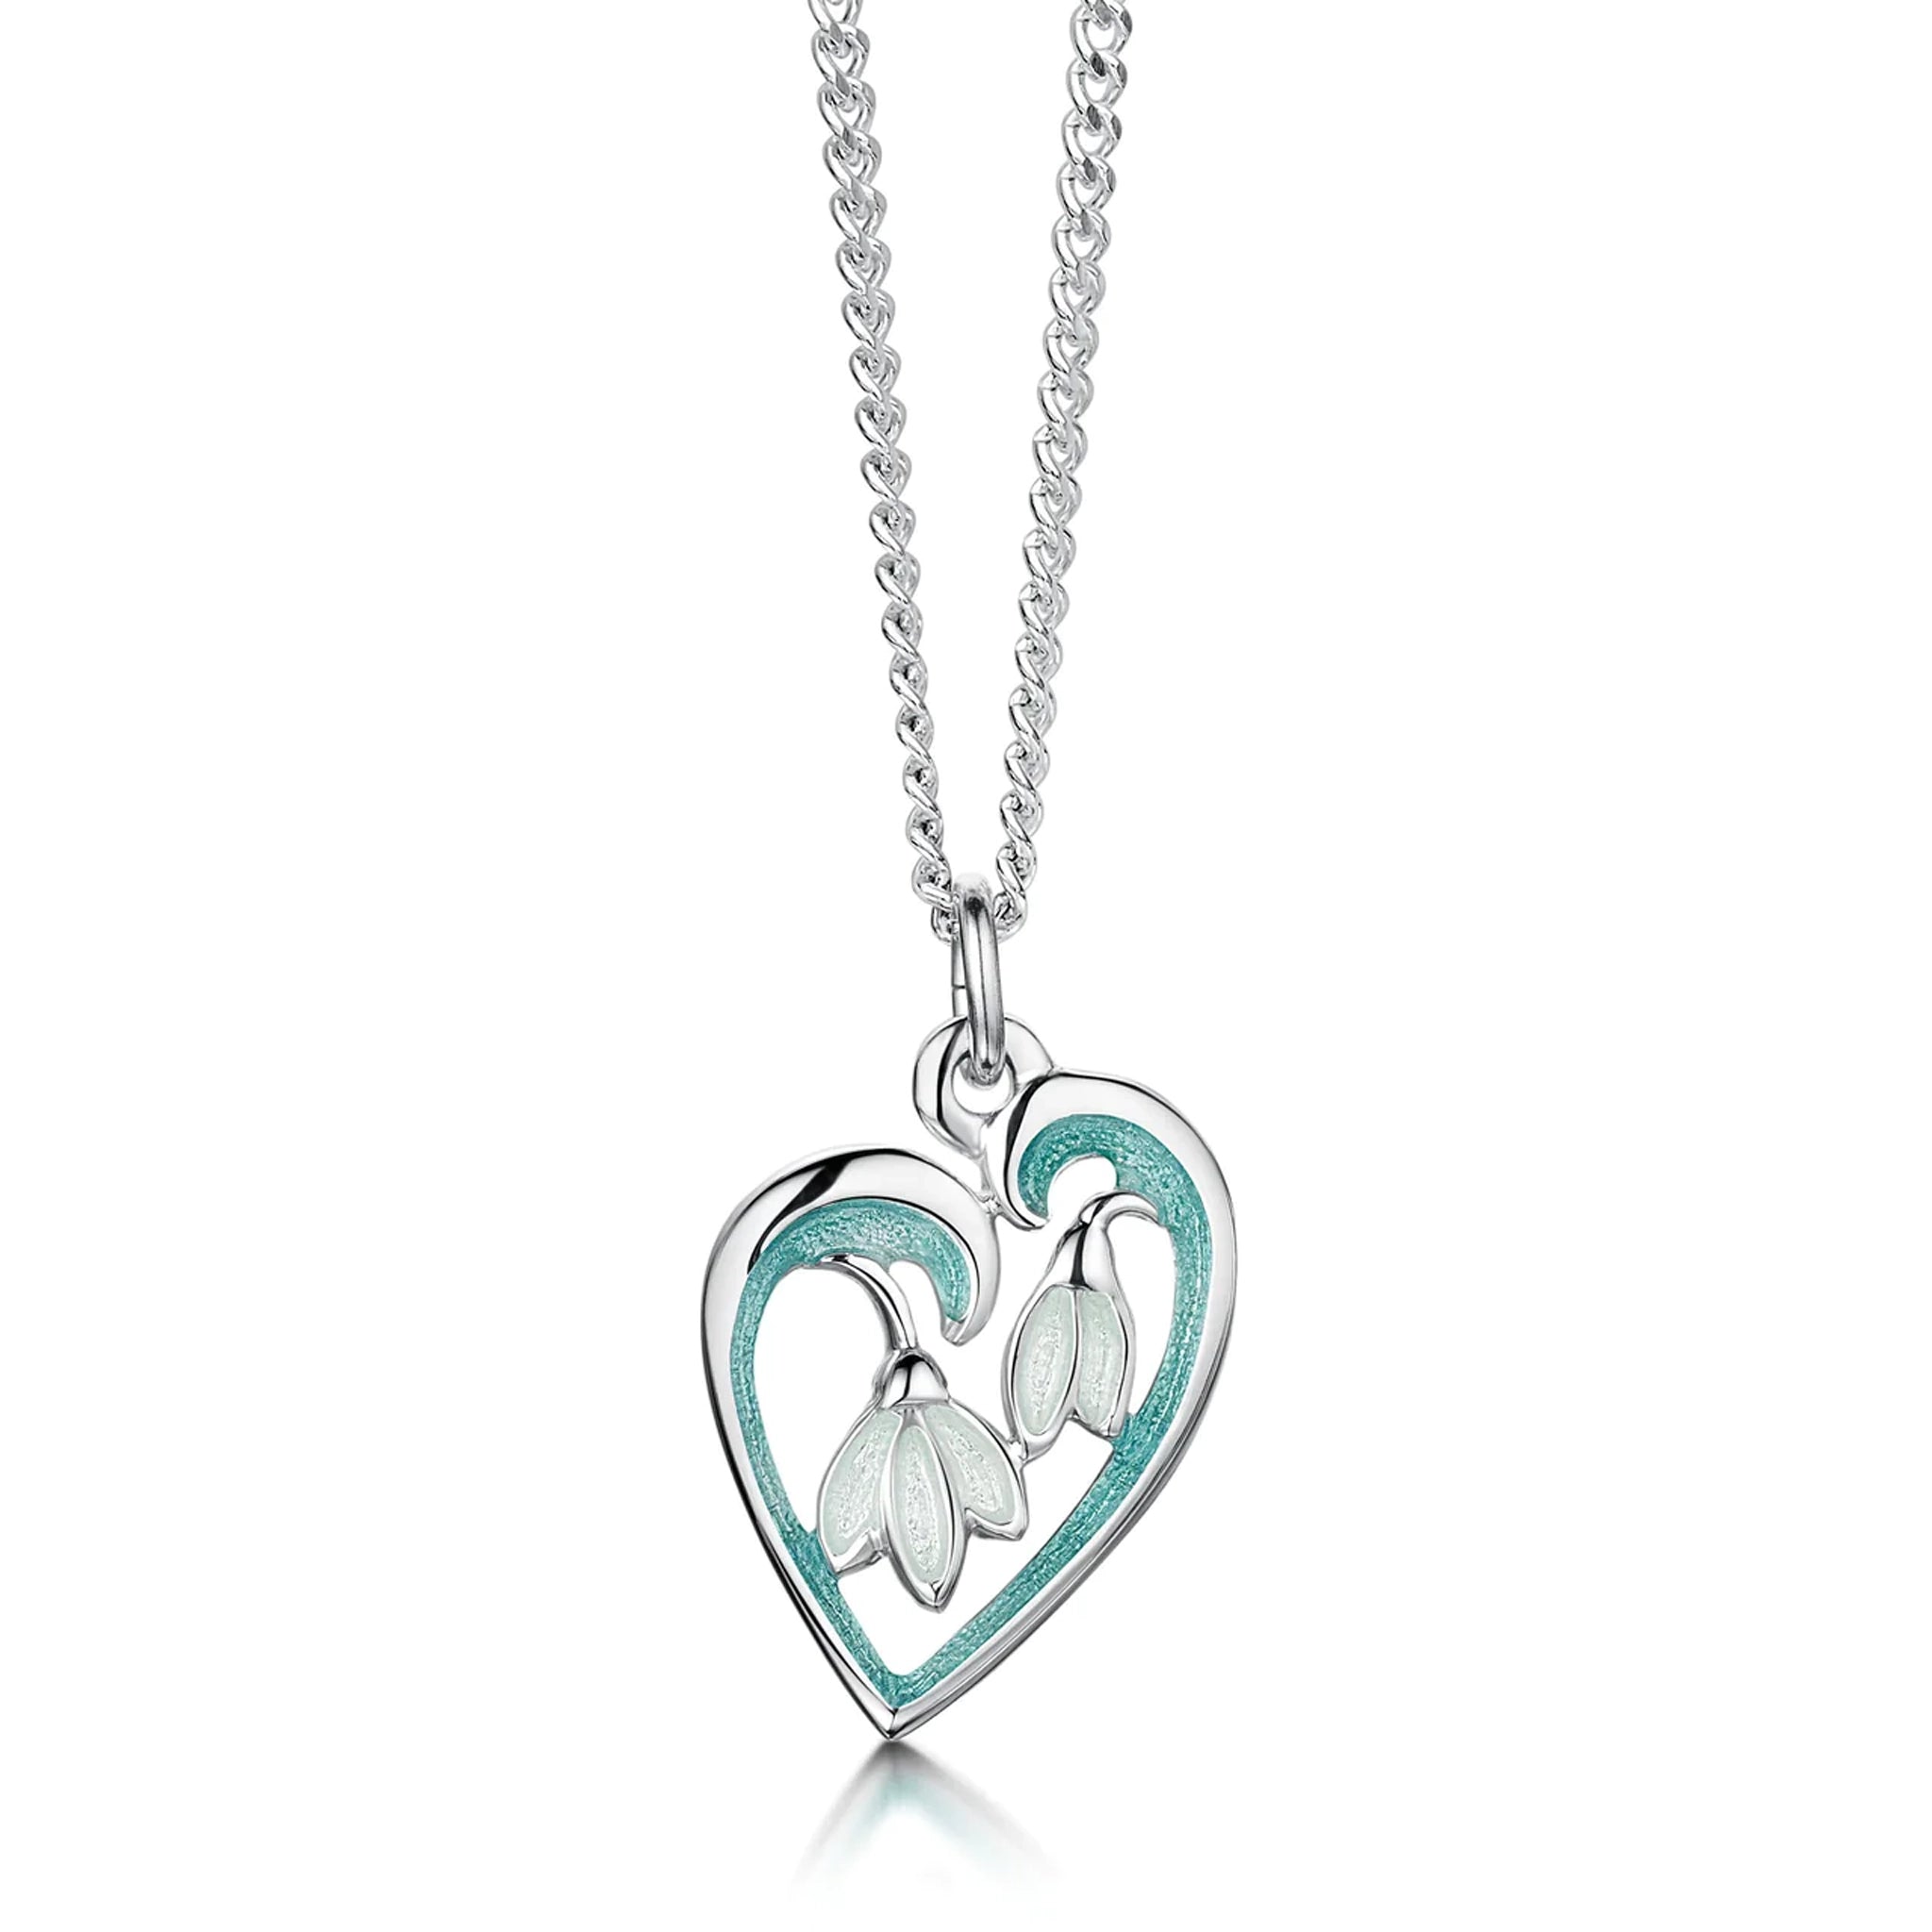 Silver pendant in a heart shape with double snowdrop flowers and green and white enamel on a silver chain